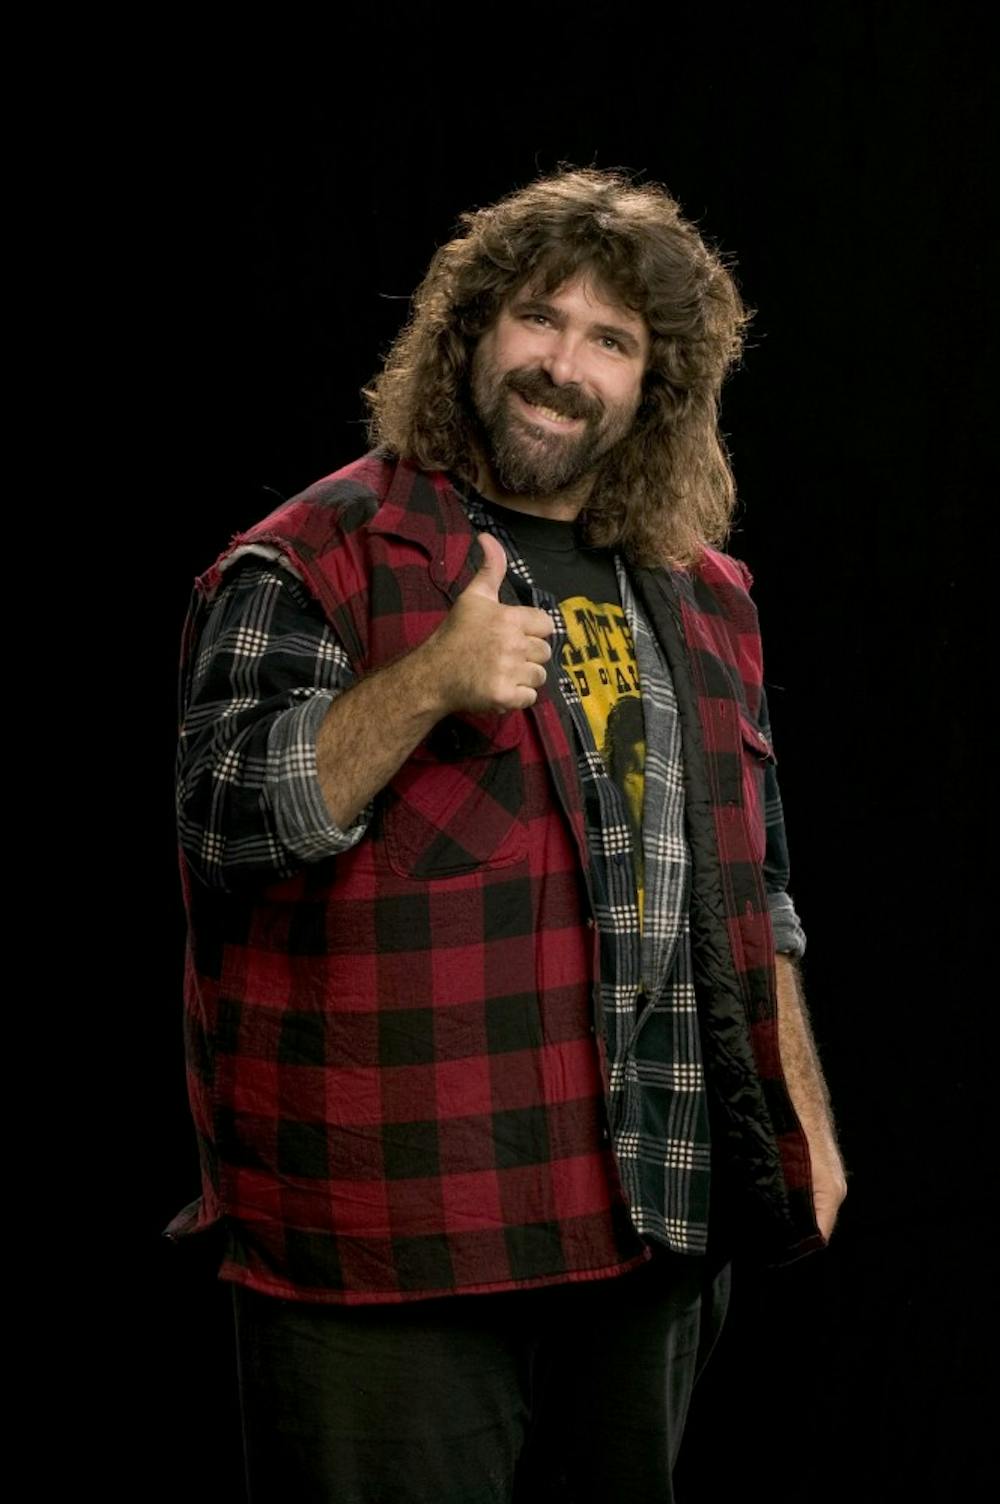 Wrestler Mick Foley to talk sexual assault at AU